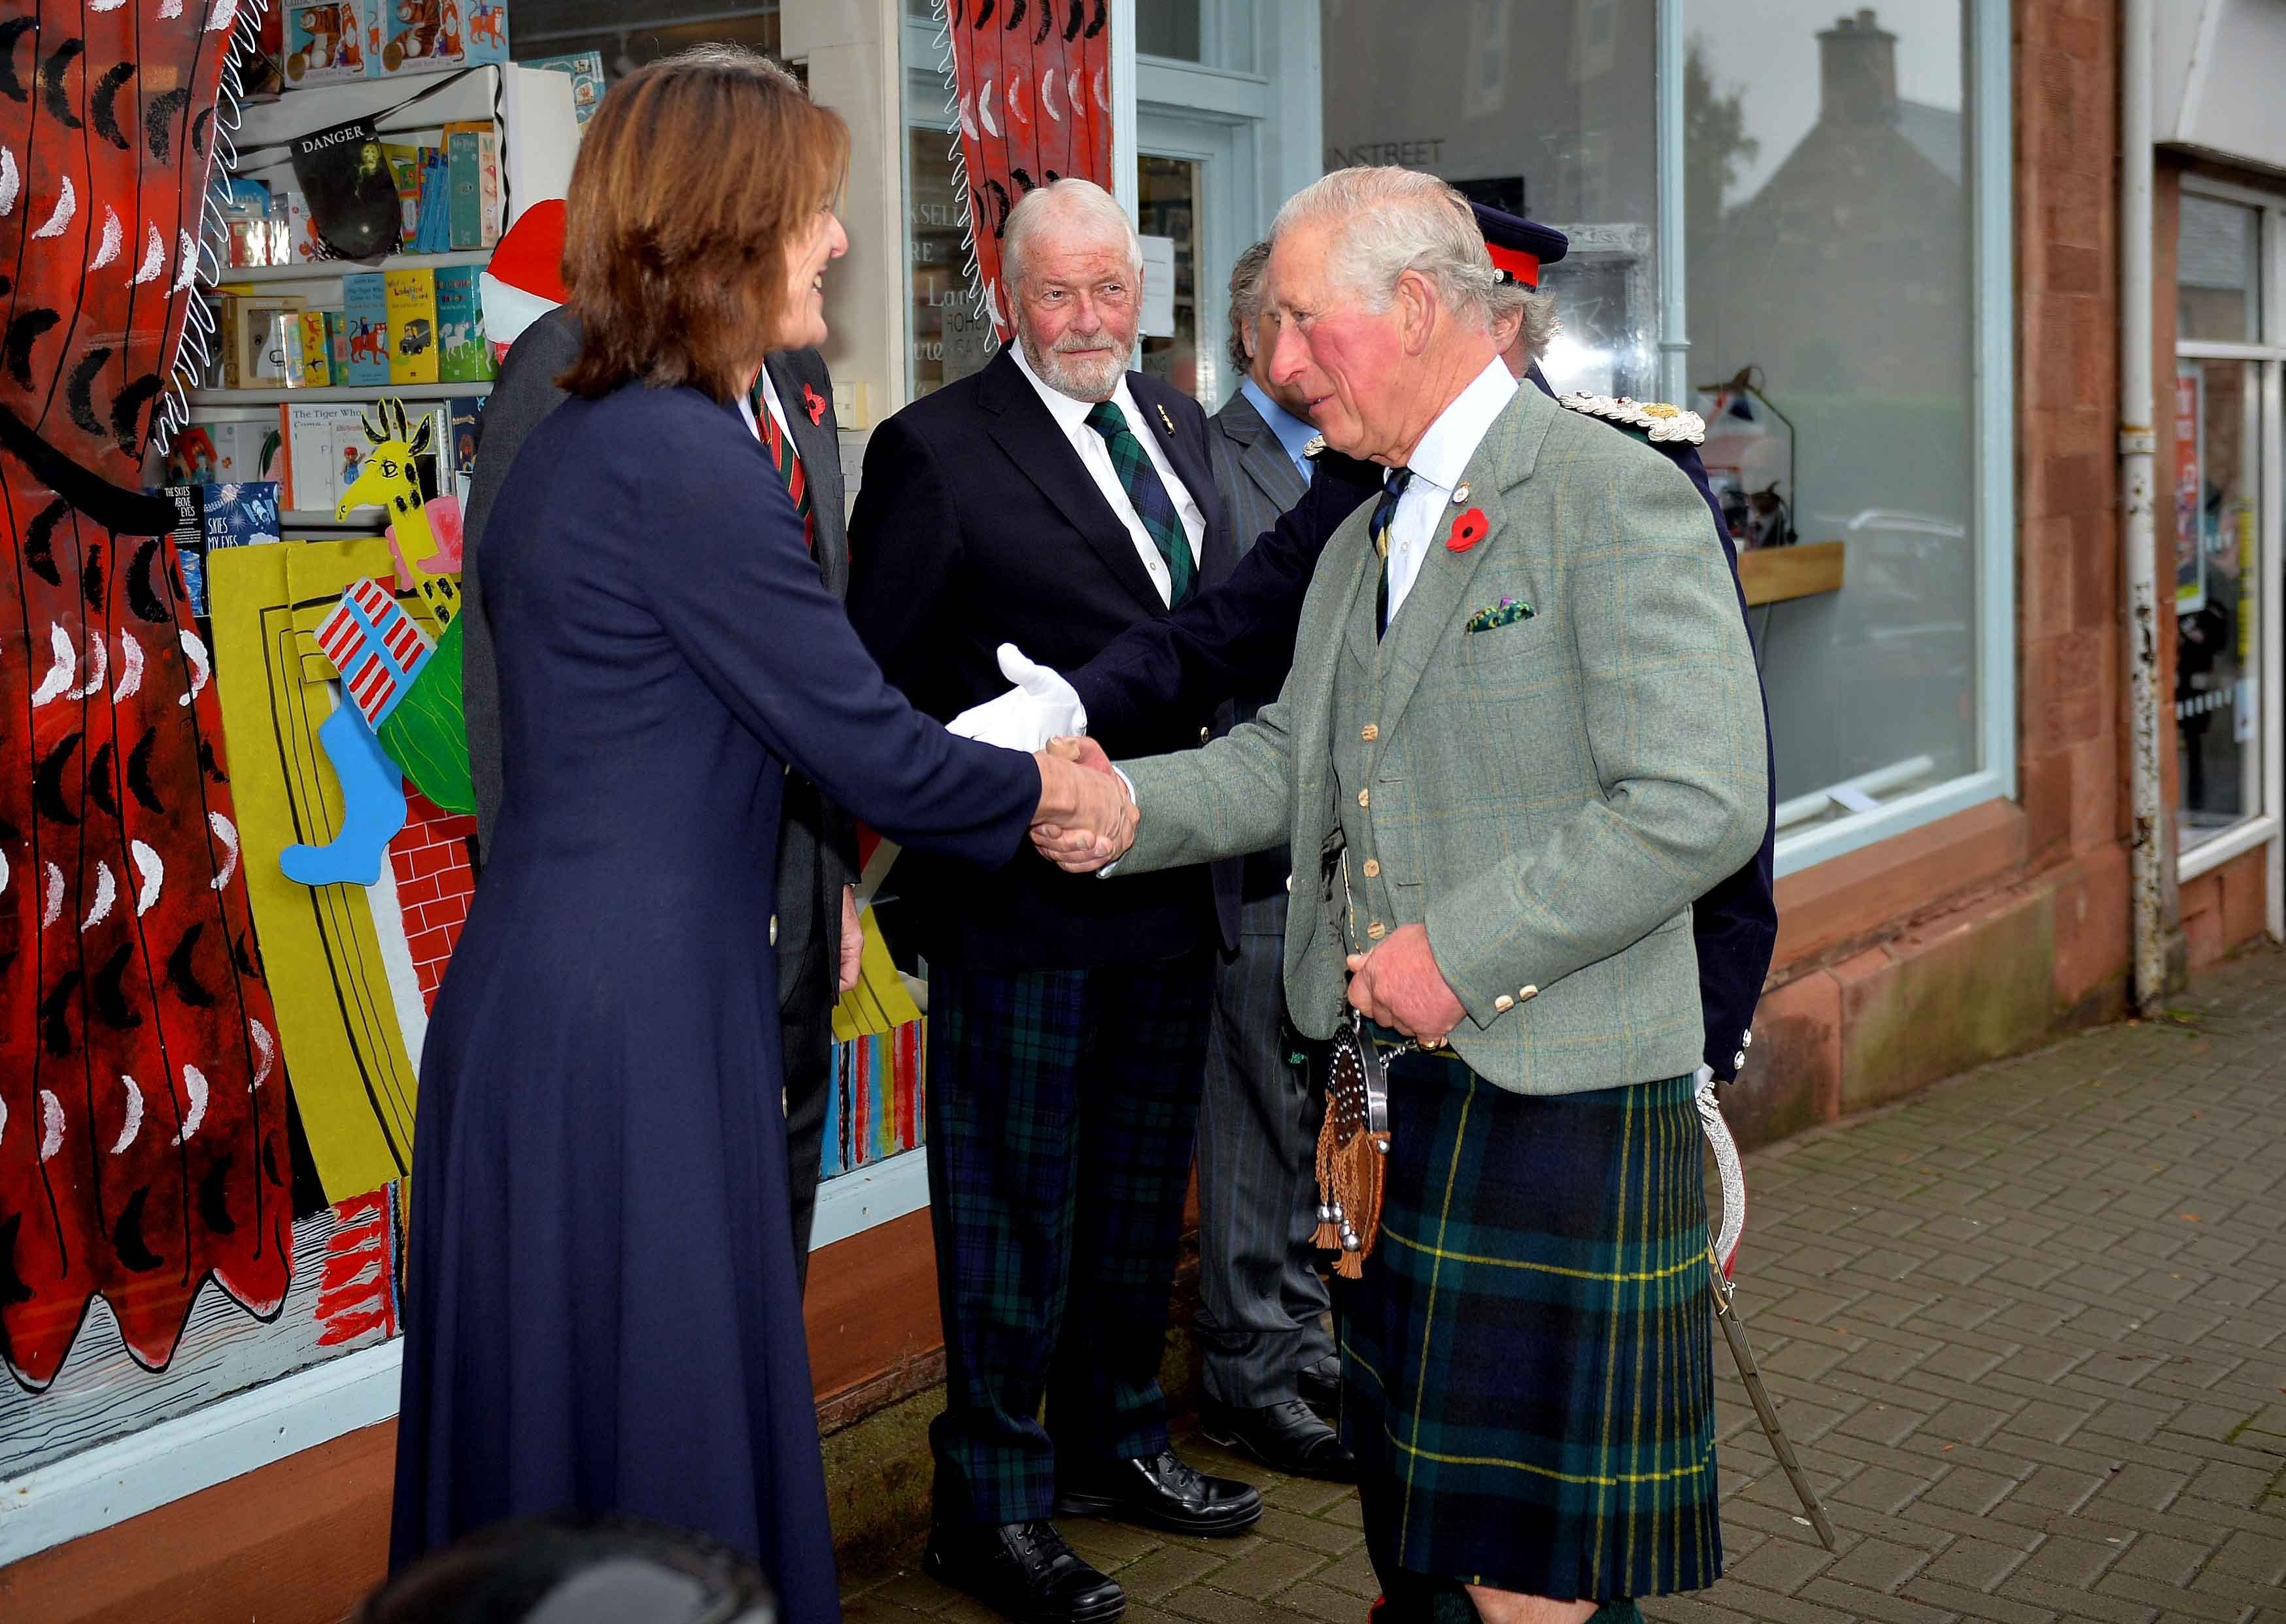 Vice Lord Lieutenant Philippa Lee welcomes the Duke to St Boswells.